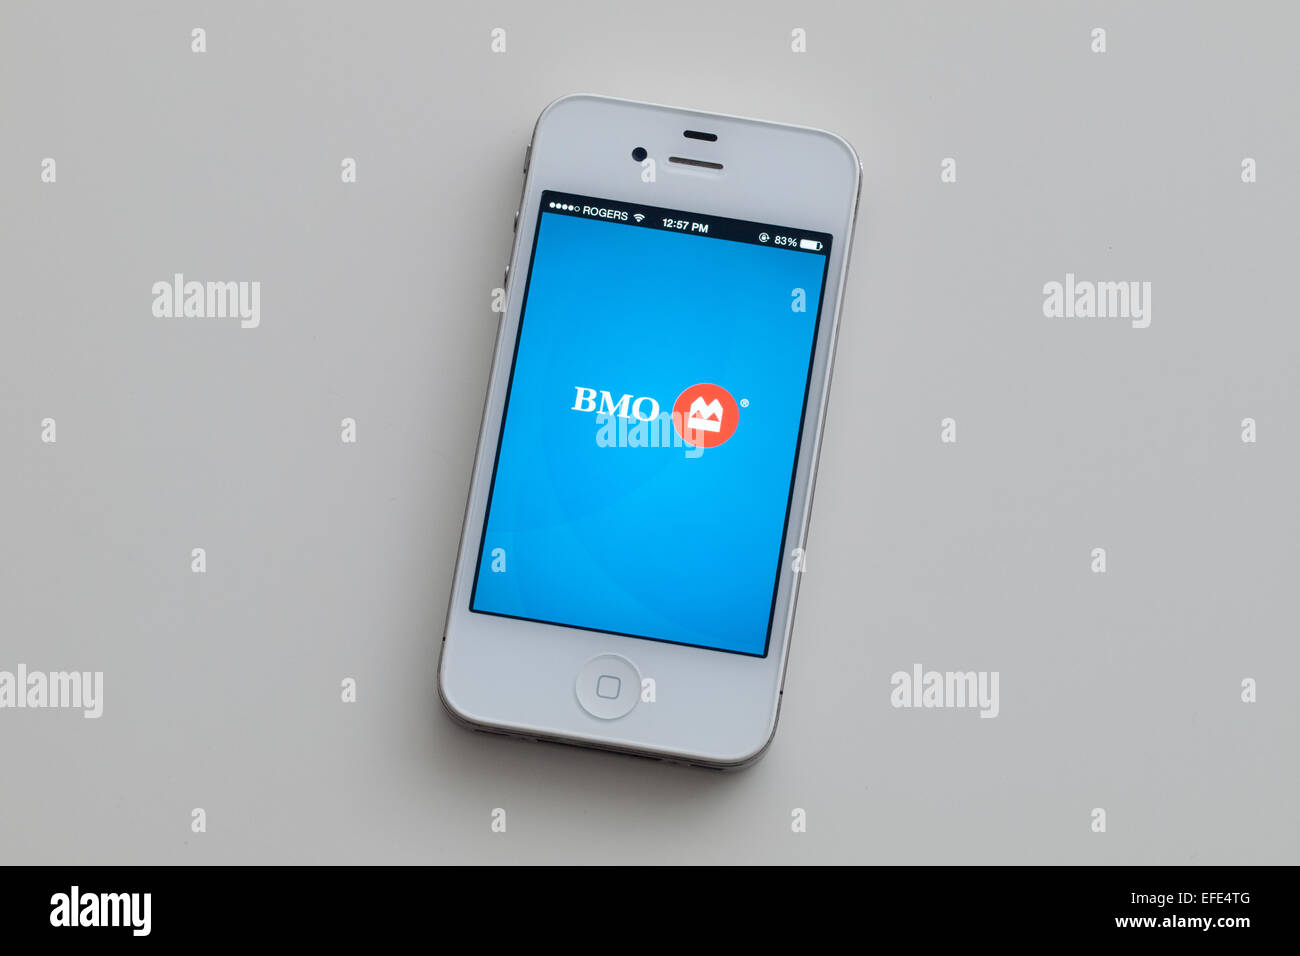 A view of the logo and homescreen of the Bank of Montreal (BMO) mobile app on an Apple iPhone 4. Stock Photo